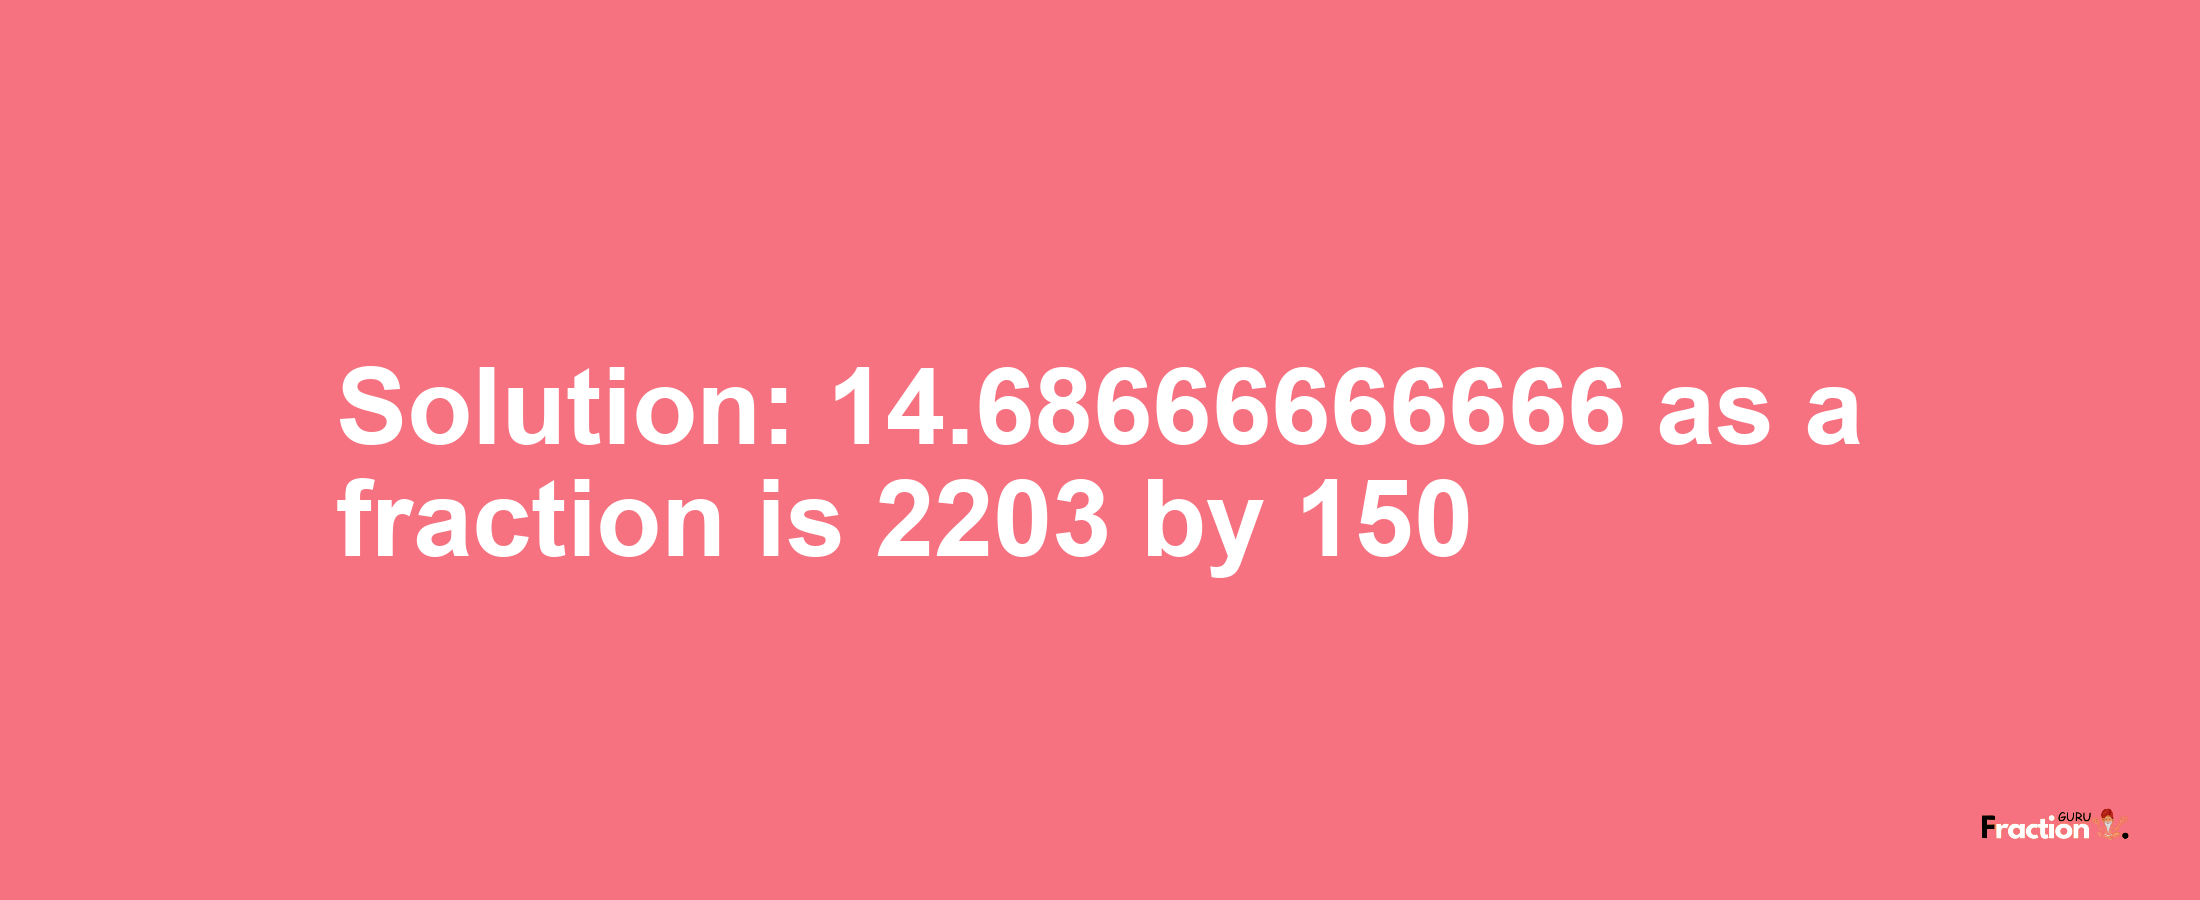 Solution:14.68666666666 as a fraction is 2203/150